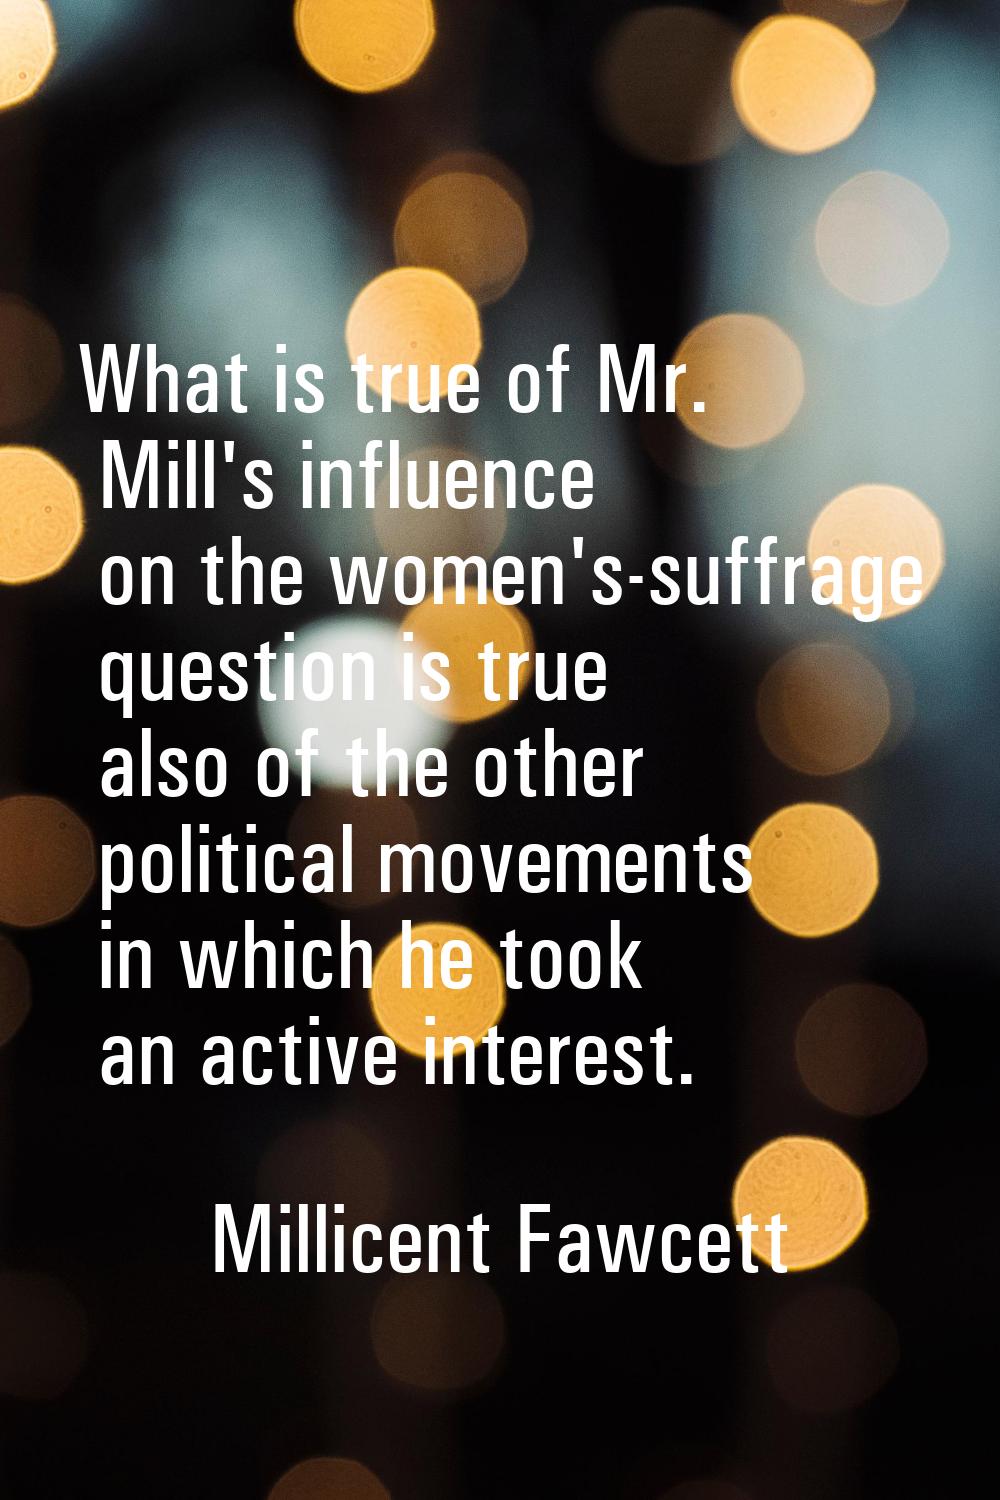 What is true of Mr. Mill's influence on the women's-suffrage question is true also of the other pol